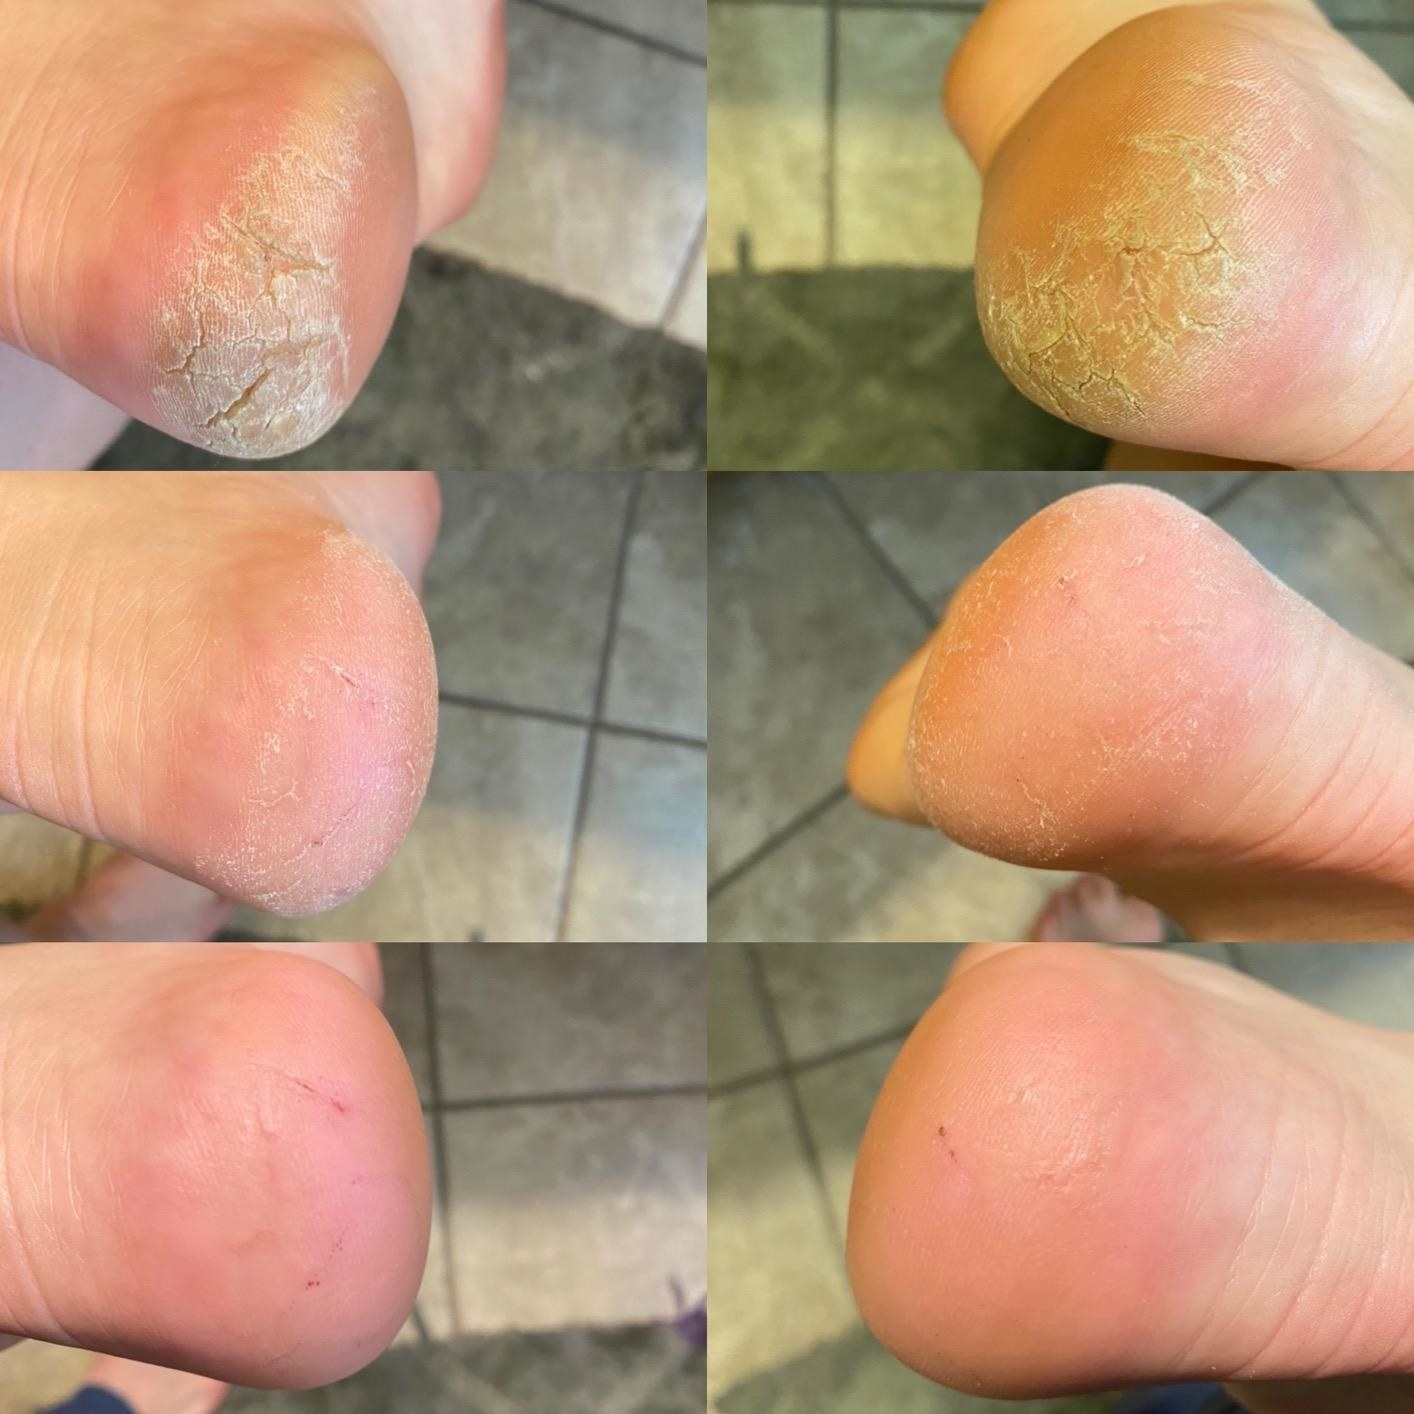 top left to bottom right: reviewer pics of dry heels with calluses, slightly callused feet, and eventually no calluses on the heels after using the foot rasp